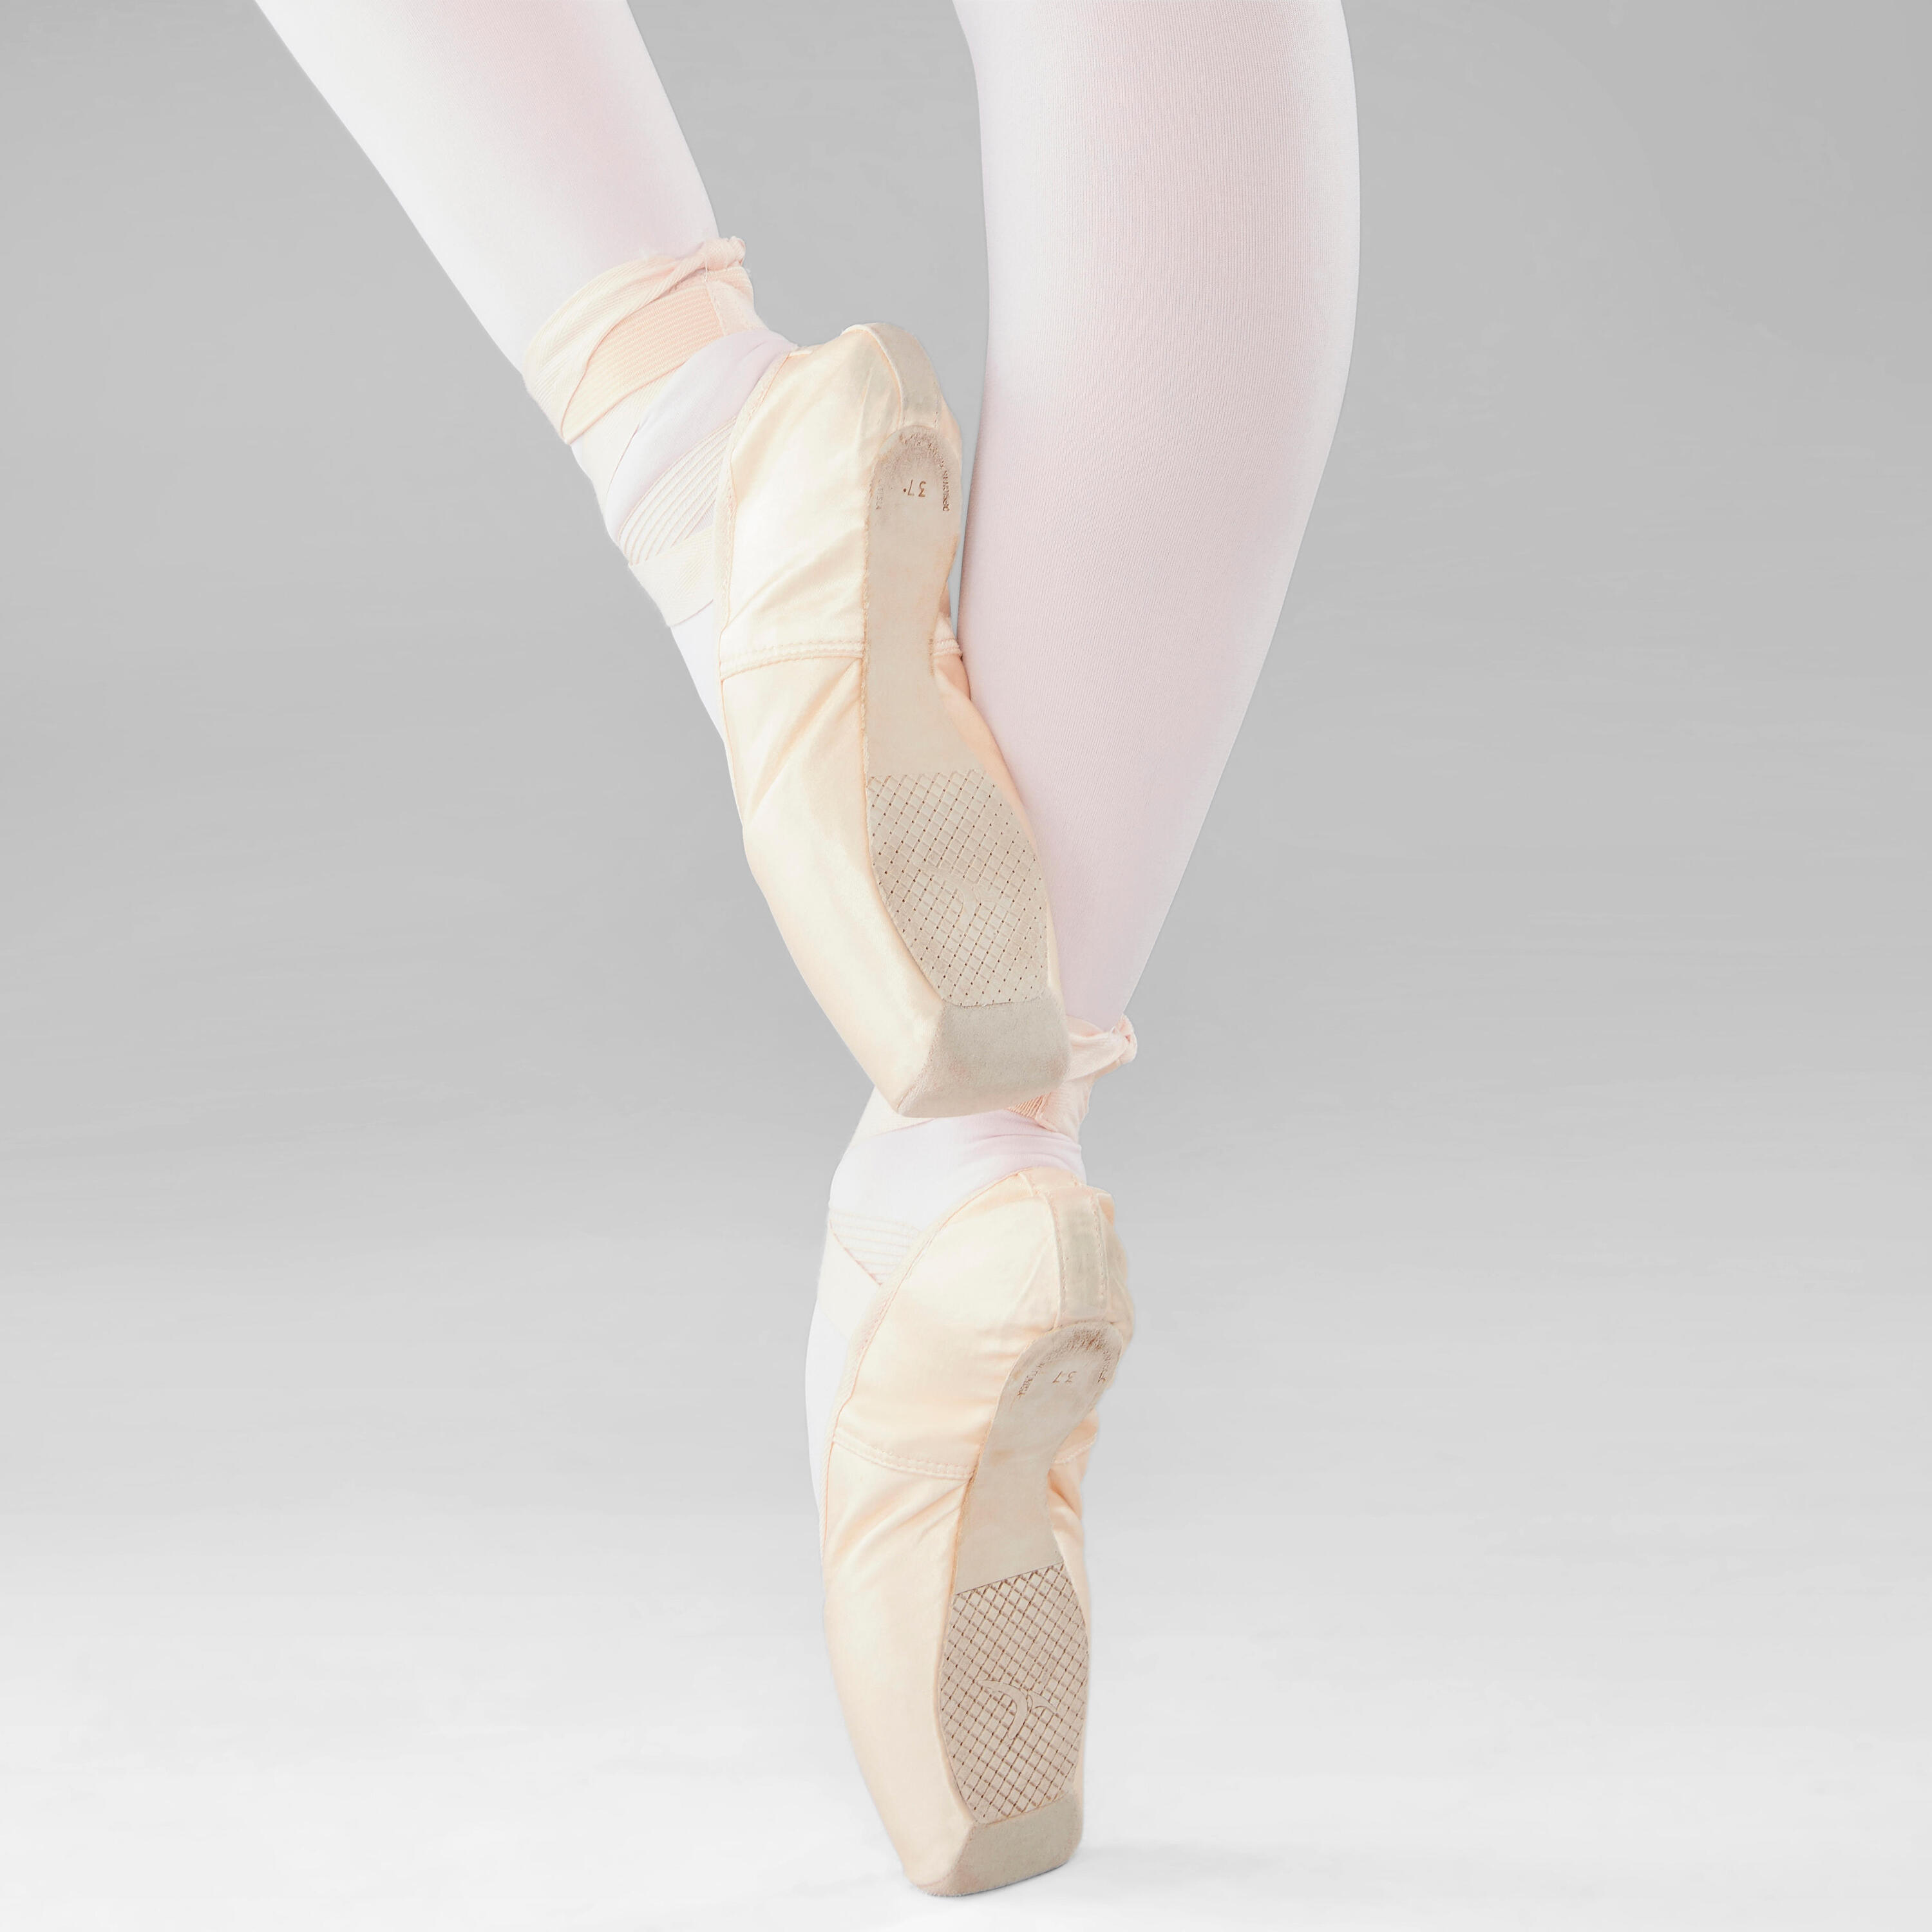 Beginner Pointe Shoes with Flexible Soles - Sizes 1 to 8 4/6